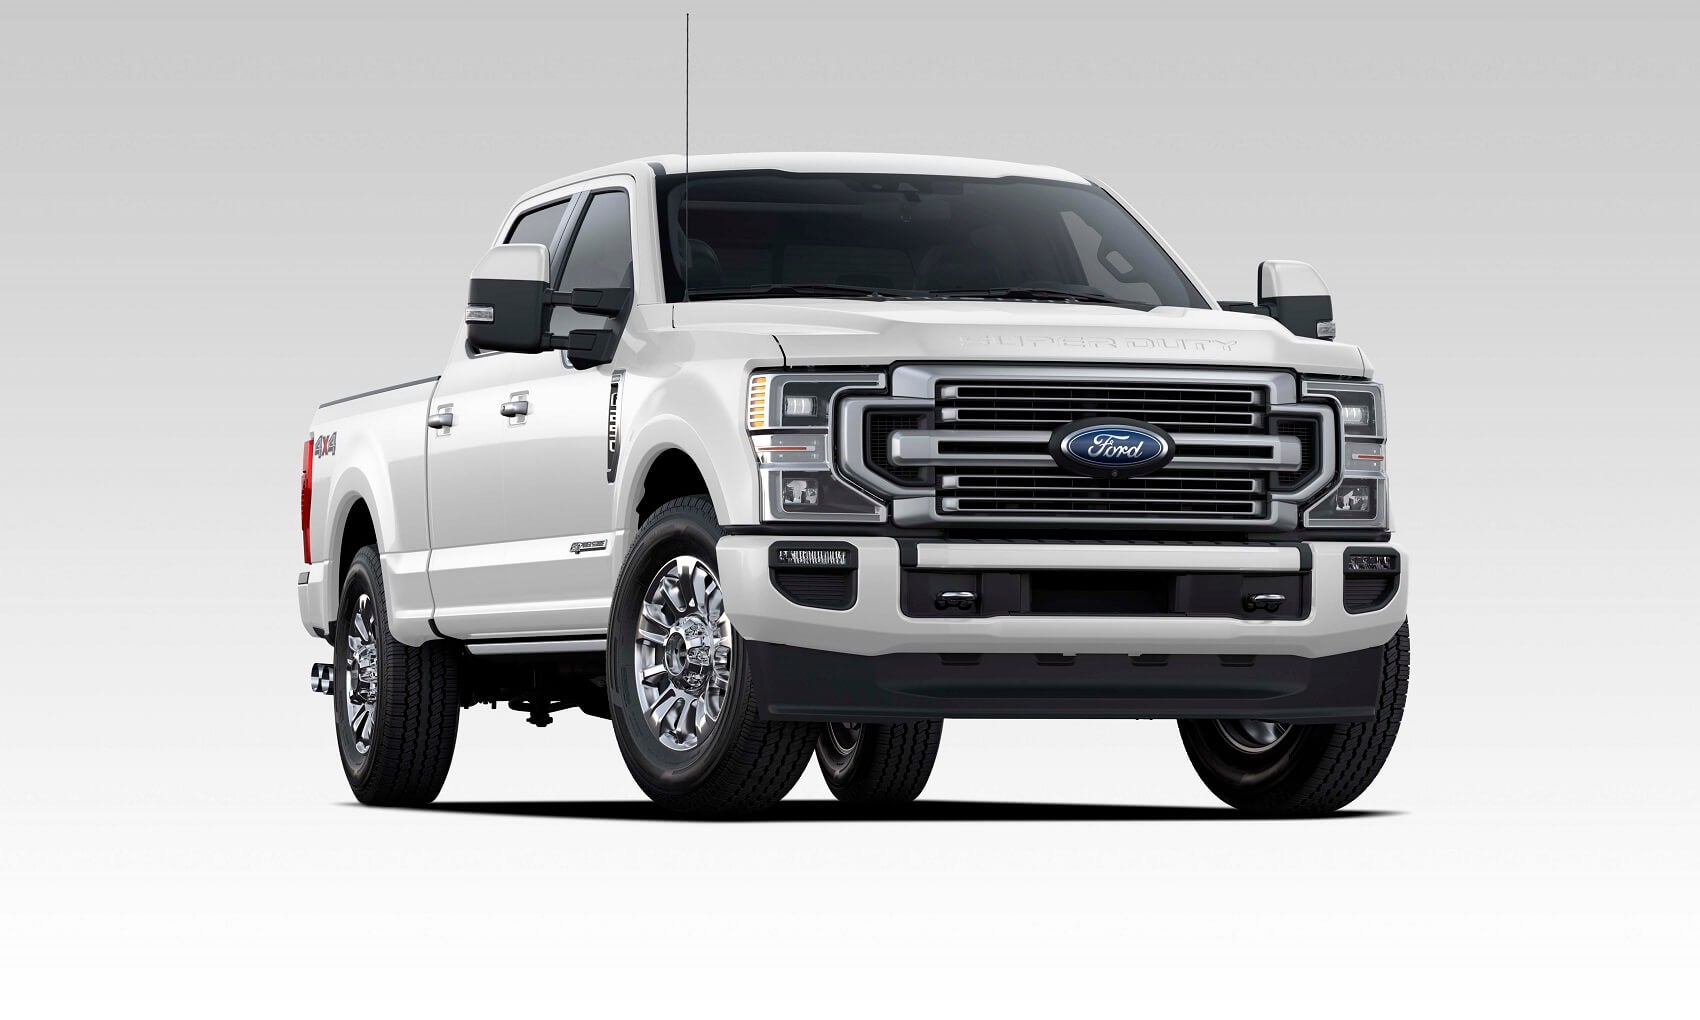 A new white 2021 Ford Super Duty F-250 against a grey and white gradient background.